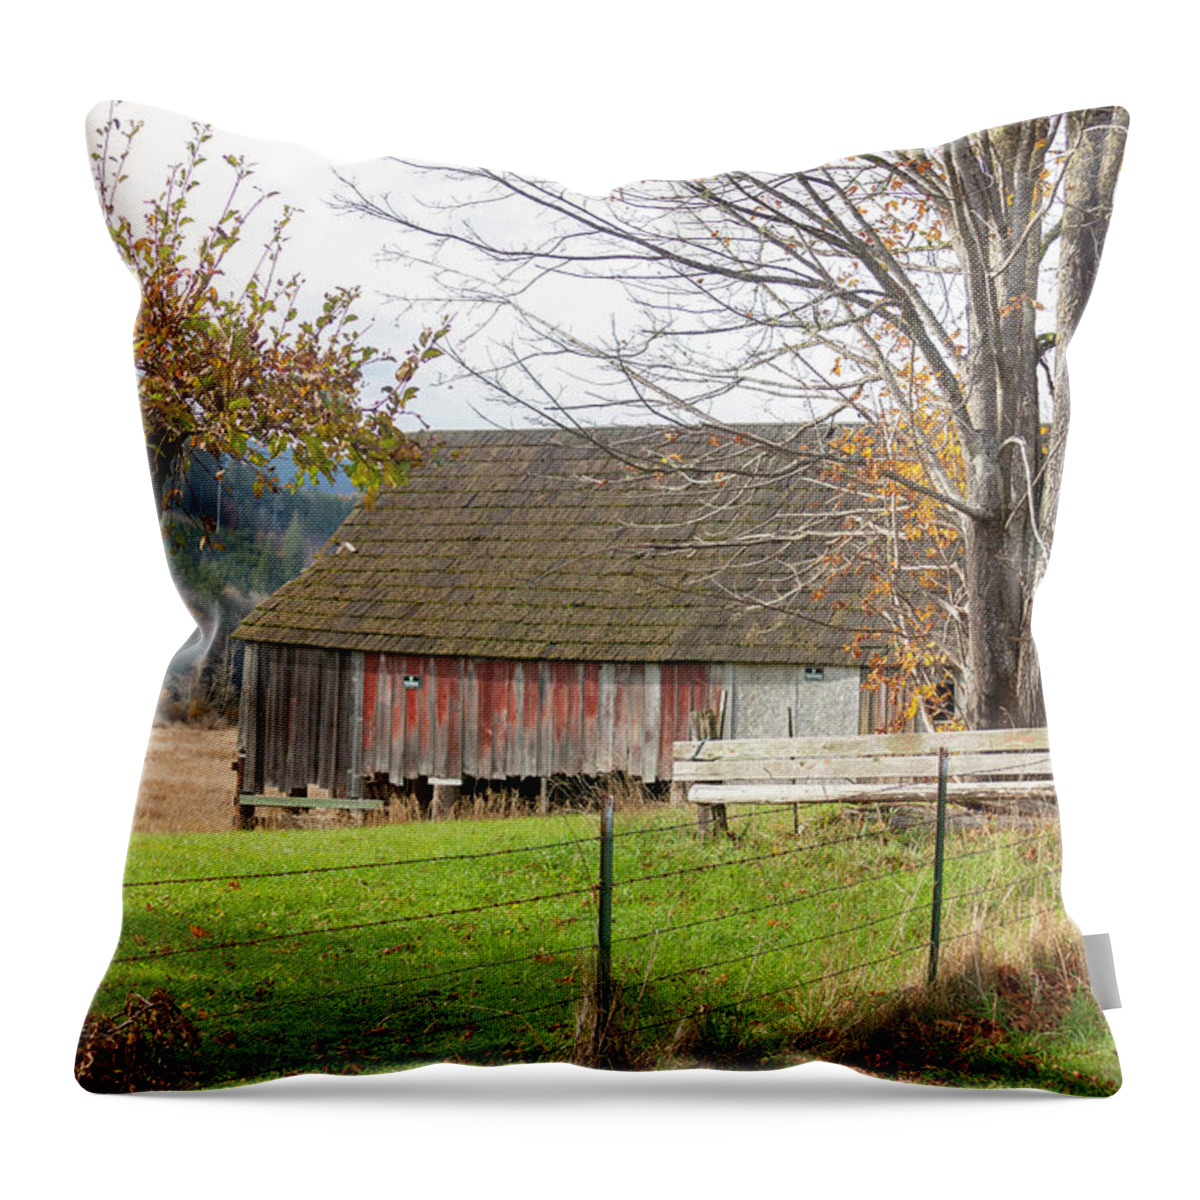 Olympic Peninsula Throw Pillow featuring the photograph Olympic Peninsula Barn by Cathy Anderson